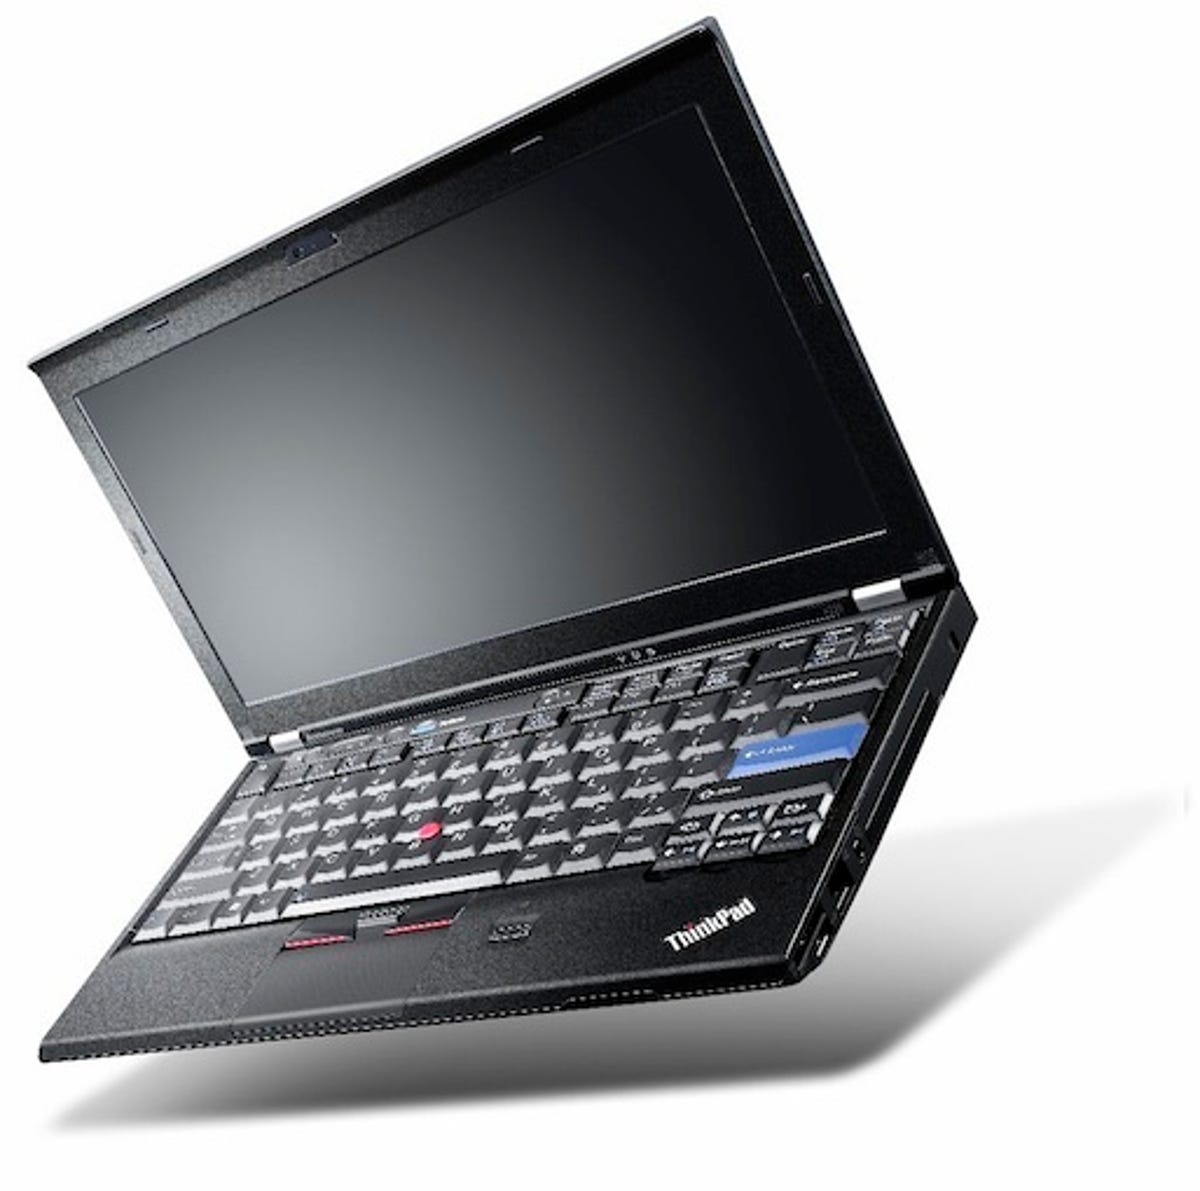 The ThinkPad X220 has a uniquely sized 12.5-inch screen, packs Sandy Bridge processors, and a USB 3.0 port in one model.